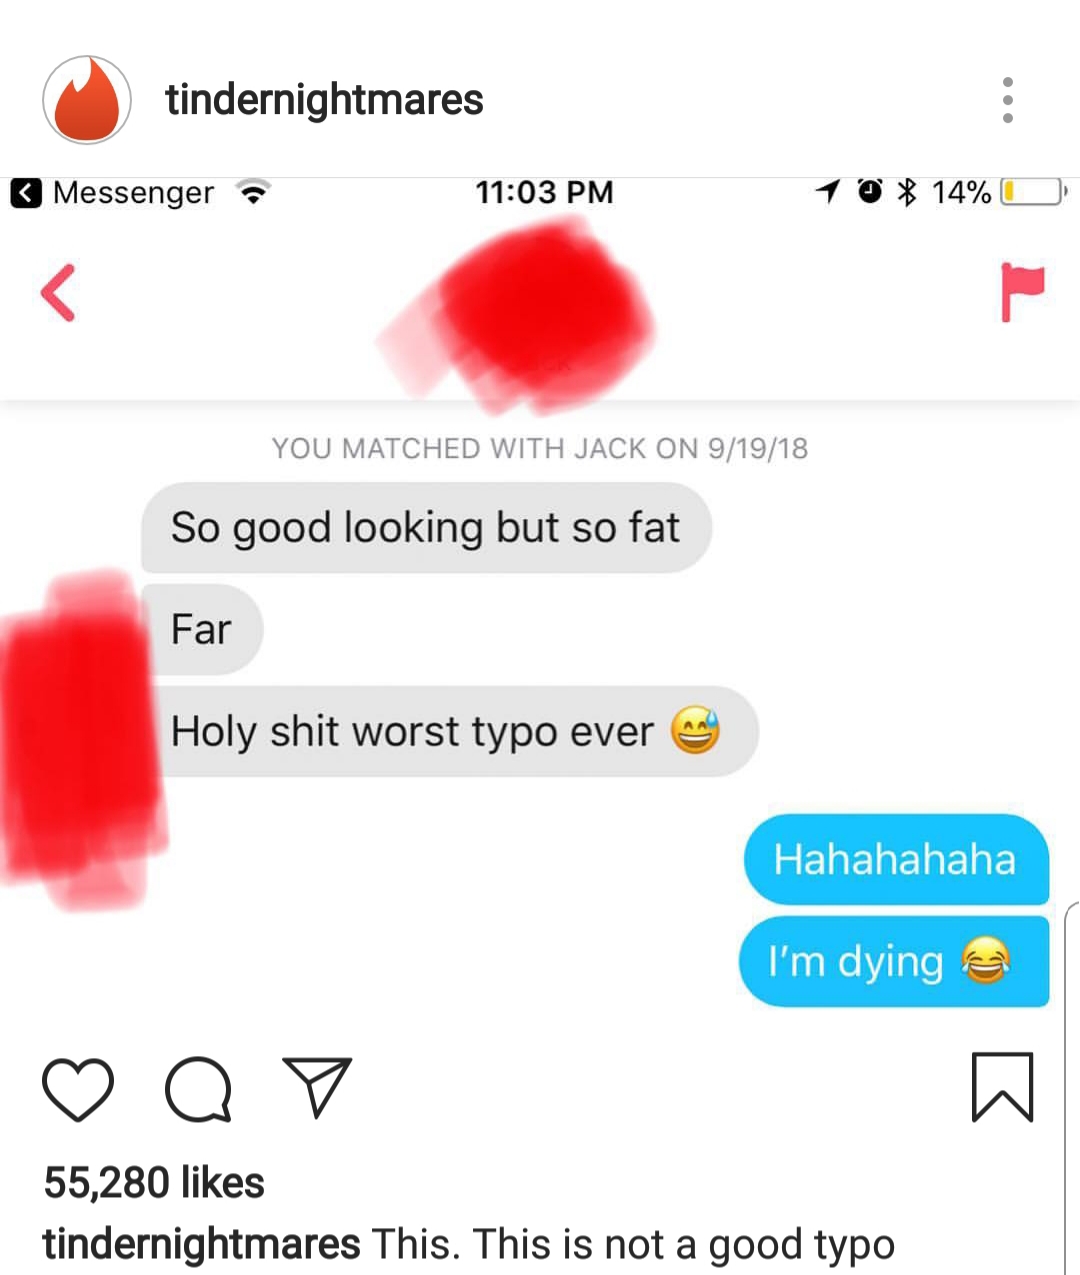 memes - lip - tindernightmares Messenger 1 % 14%O You Matched With Jack On 91918 So good looking but so fat Far Holy shit worst typo ever a Hahahahaha I'm dying 009 w 55,280 tindernightmares This. This is not a good typo